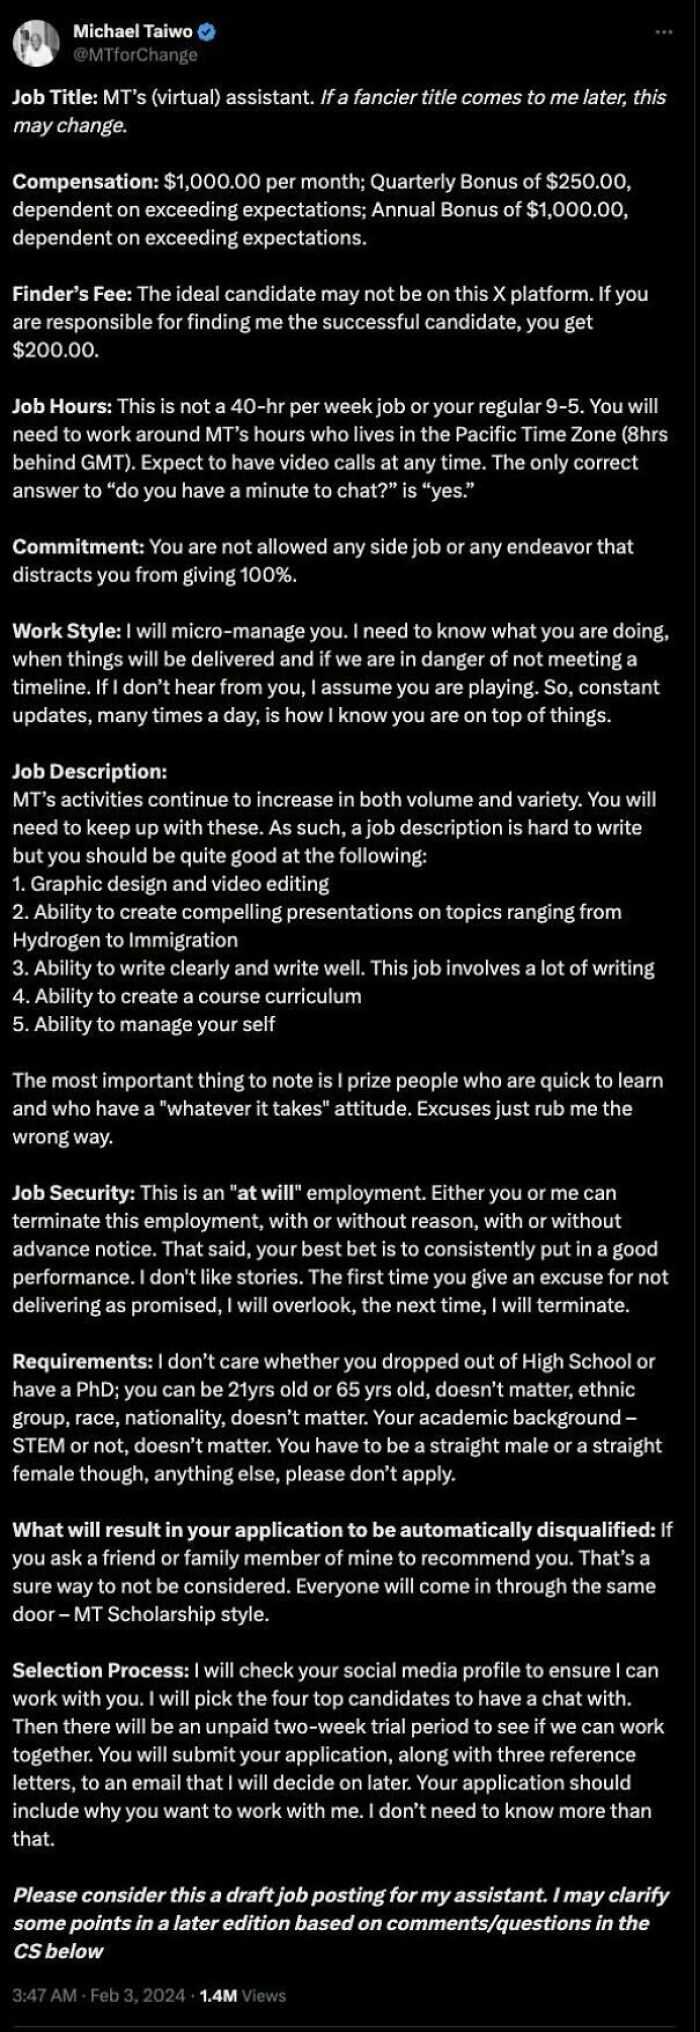 One Of The Most Insane Job Postings I’ve Ever Read